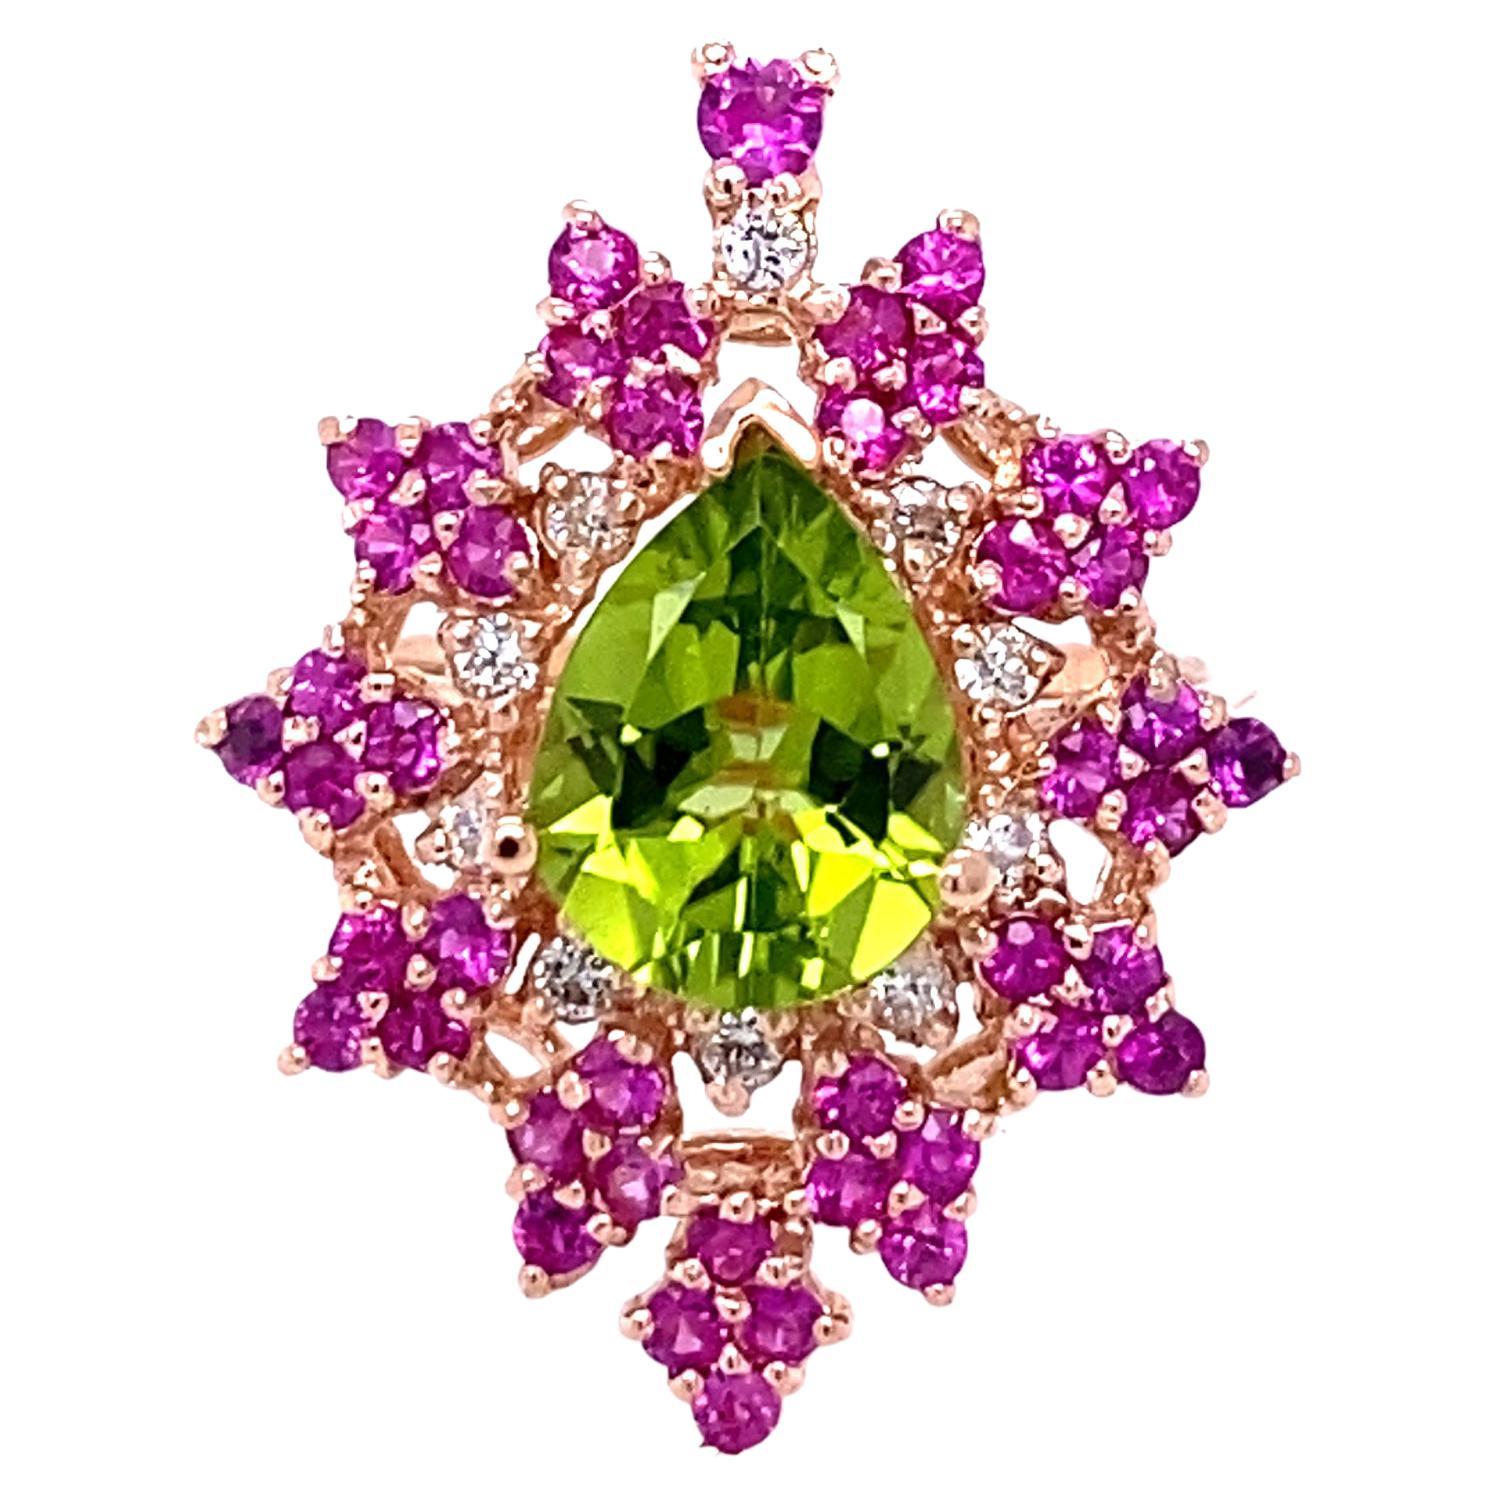 3.51 Carat Natural Peridot Sapphire Diamond Rose Gold Cocktail Ring

This beautiful ring has an Pear Cut Peridot that weighs 2.27 Carats. The ring is surrounded by 45 Pink Sapphires that weigh 1.07 Carats and 10 Round Cut Diamonds that weigh 0.17